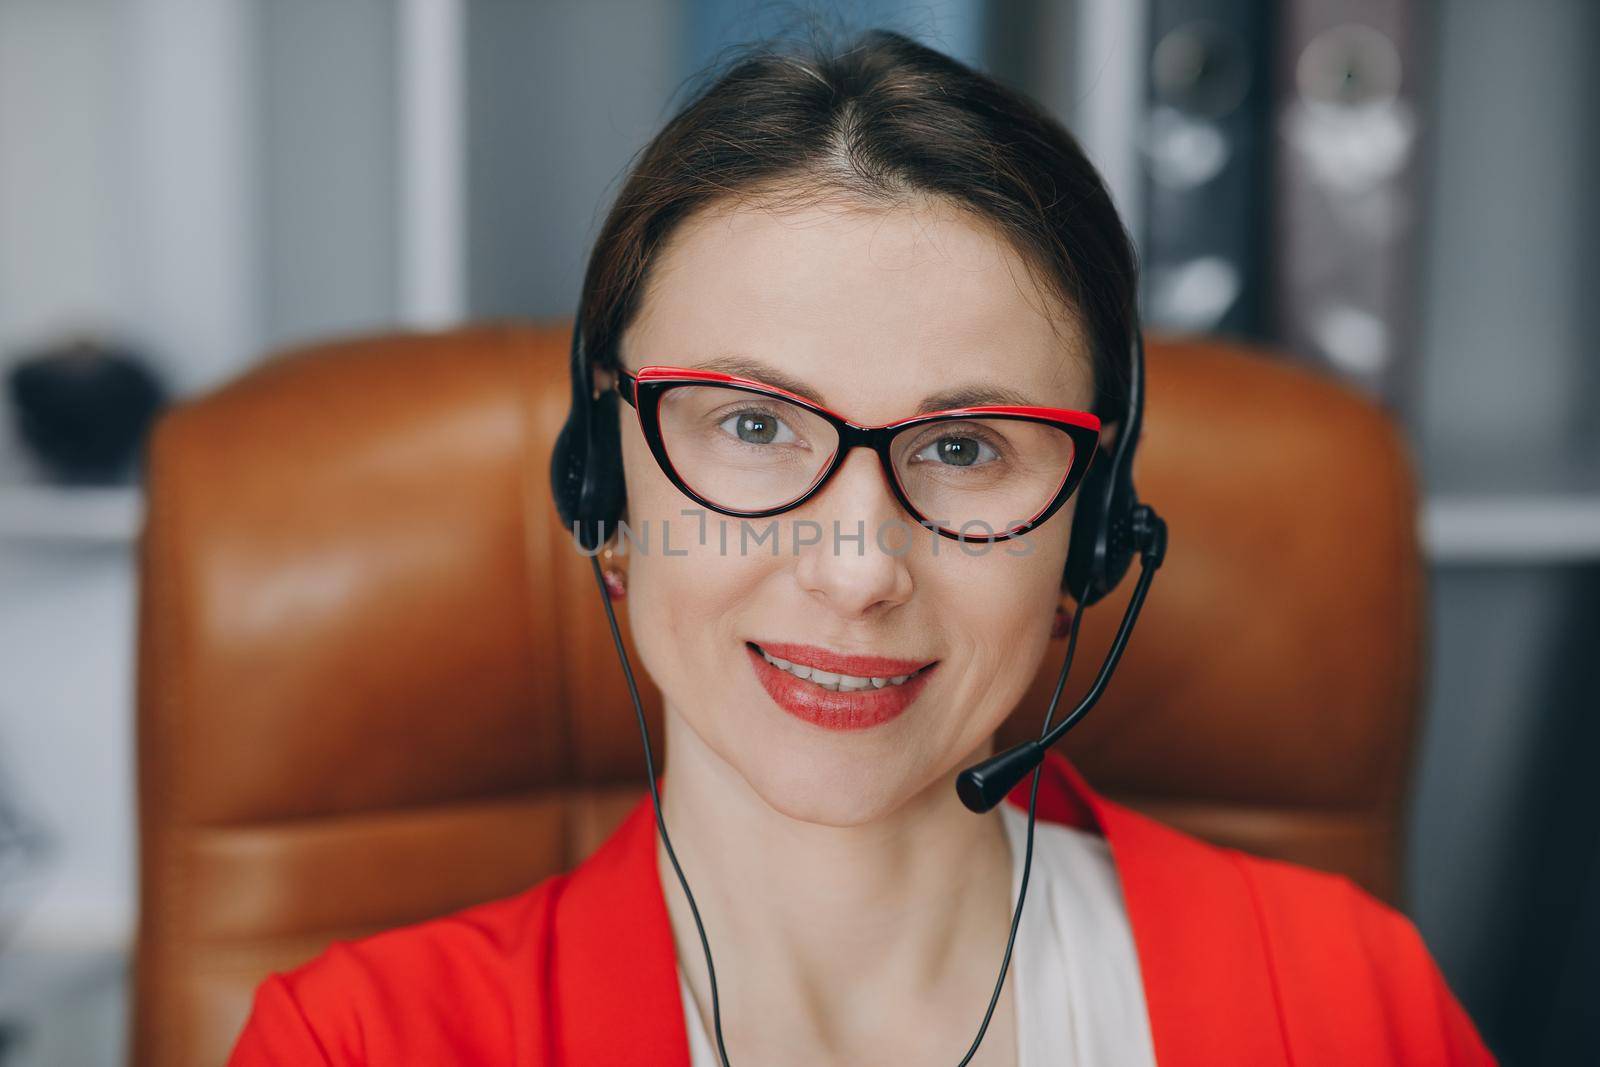 Video chat job interview or distance language course class with online teacher concept. Happy young woman wear headset communicating by conference call speak looking at computer at home office.